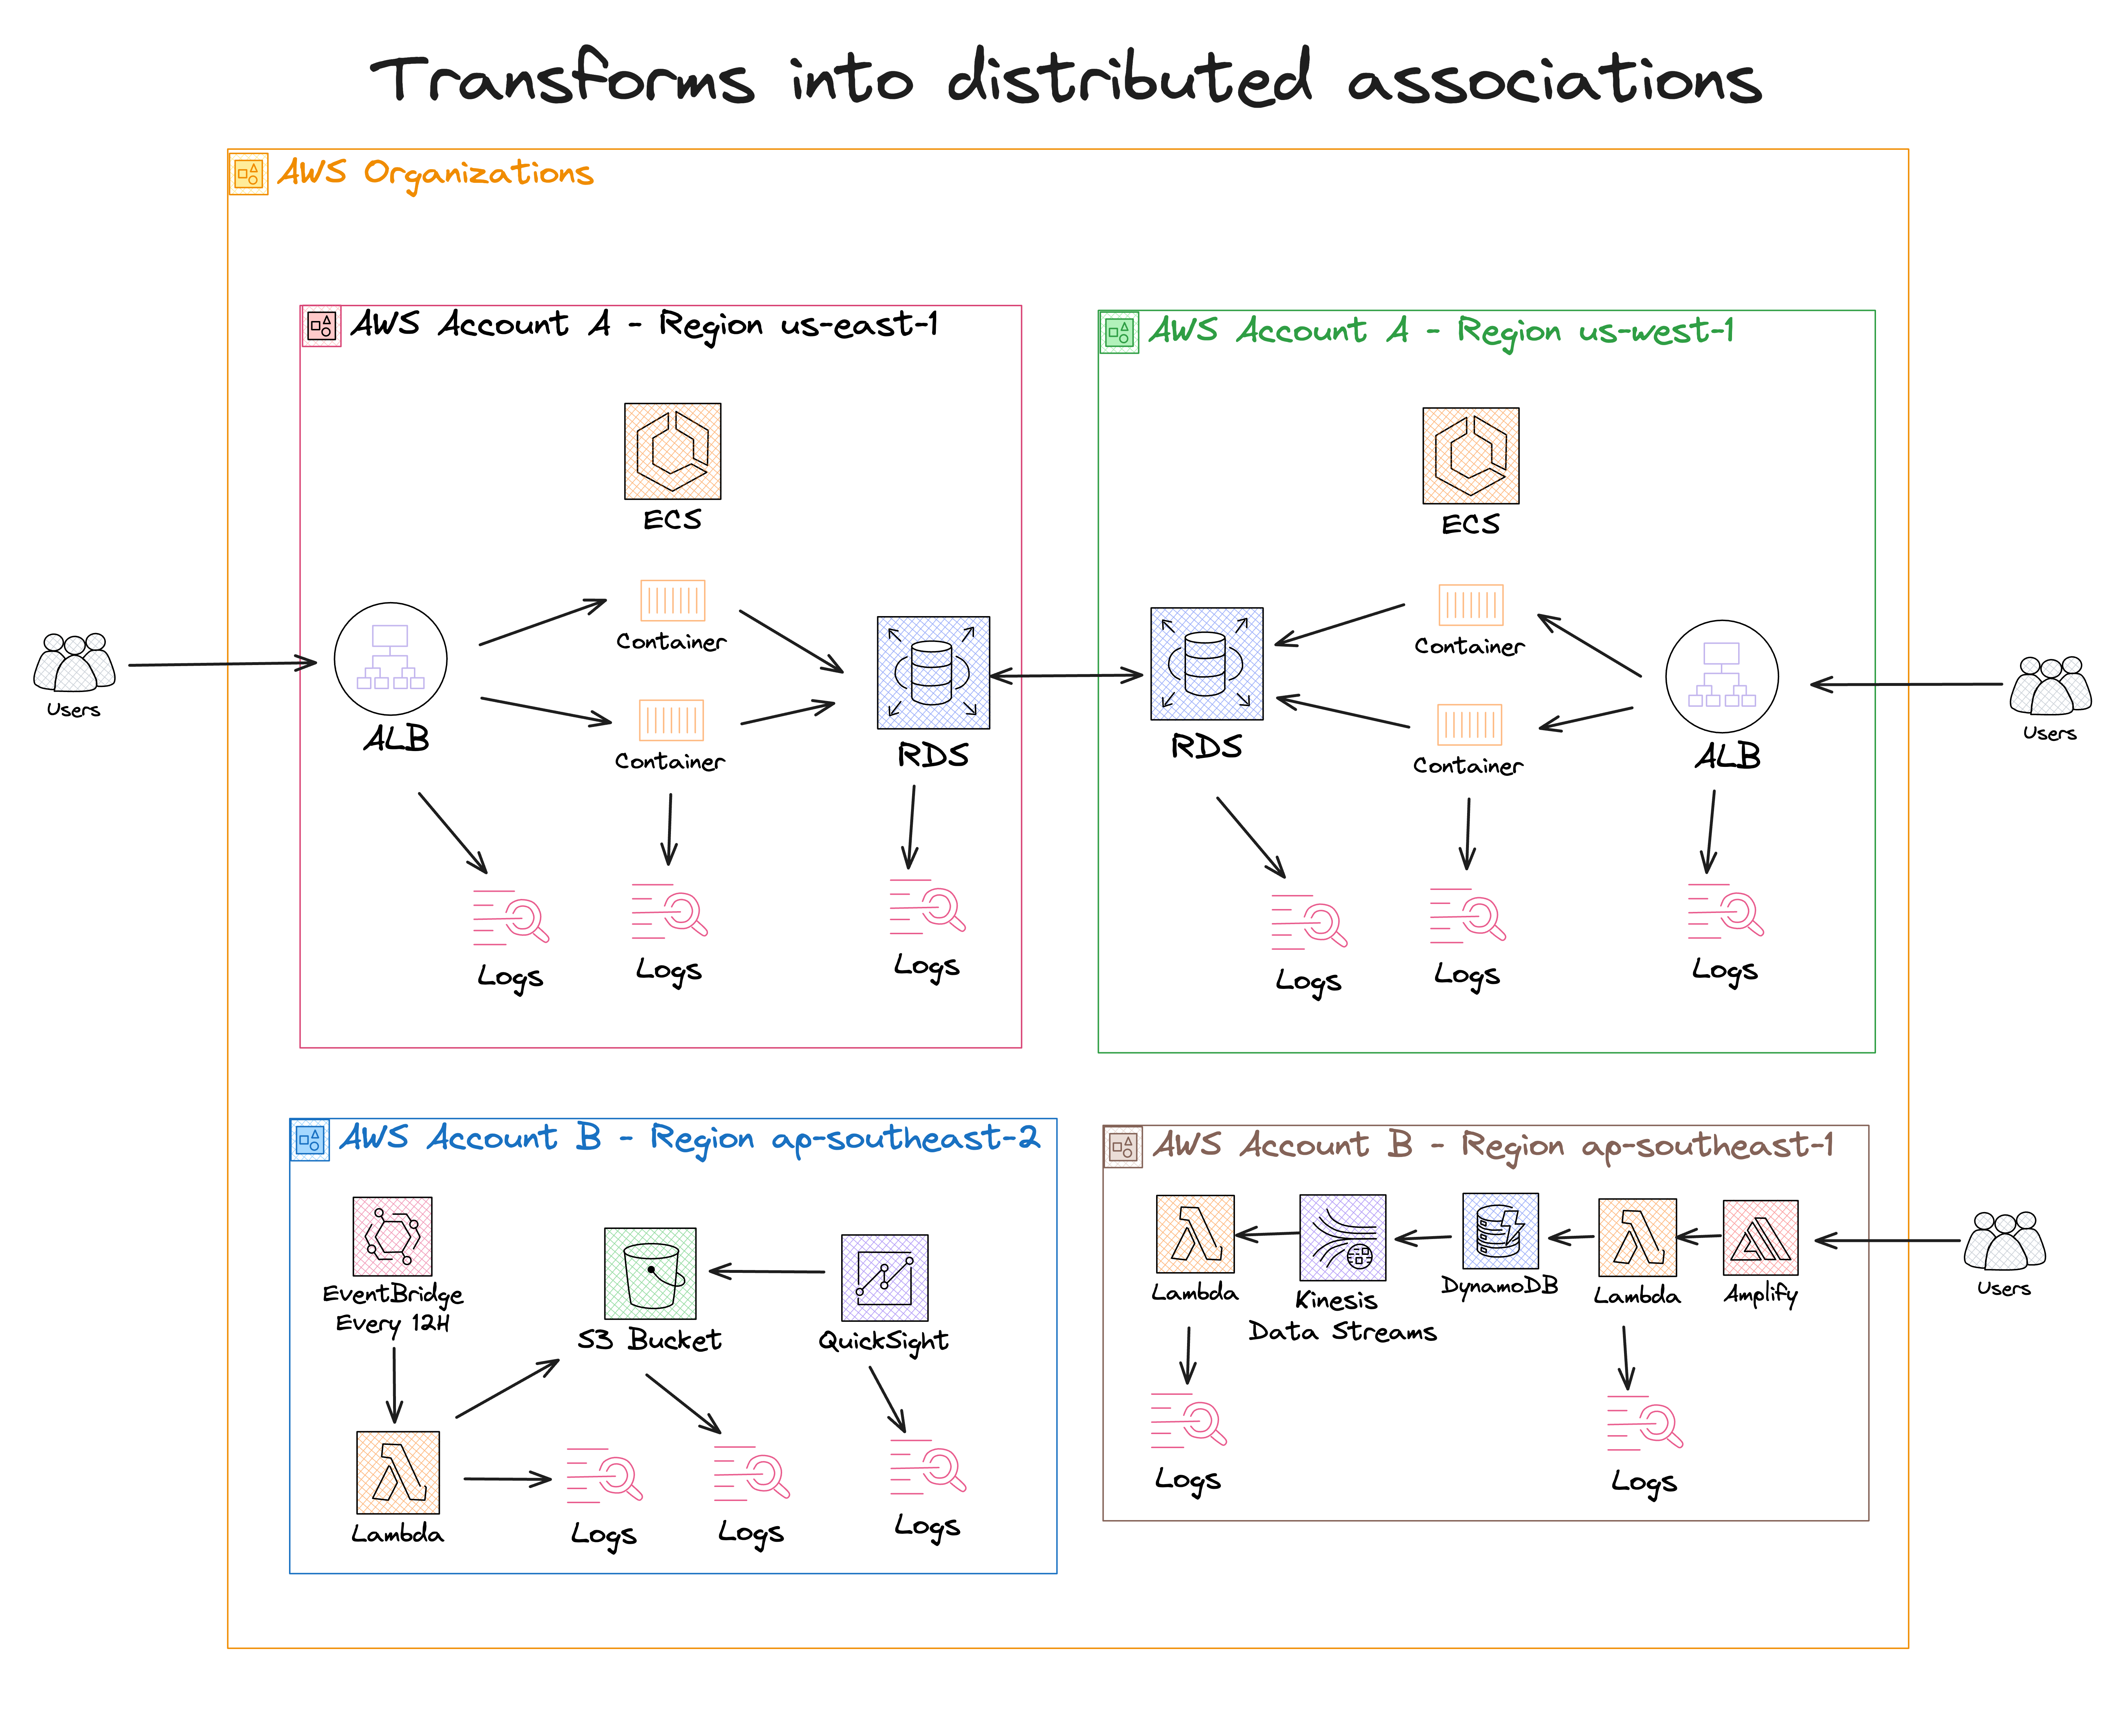 A diagram showing a complex application with multiple aws accounts, regions, log groups and different services, including load balancer, containers, databases, s3 buckets, analytics dashboard, queues and streams.